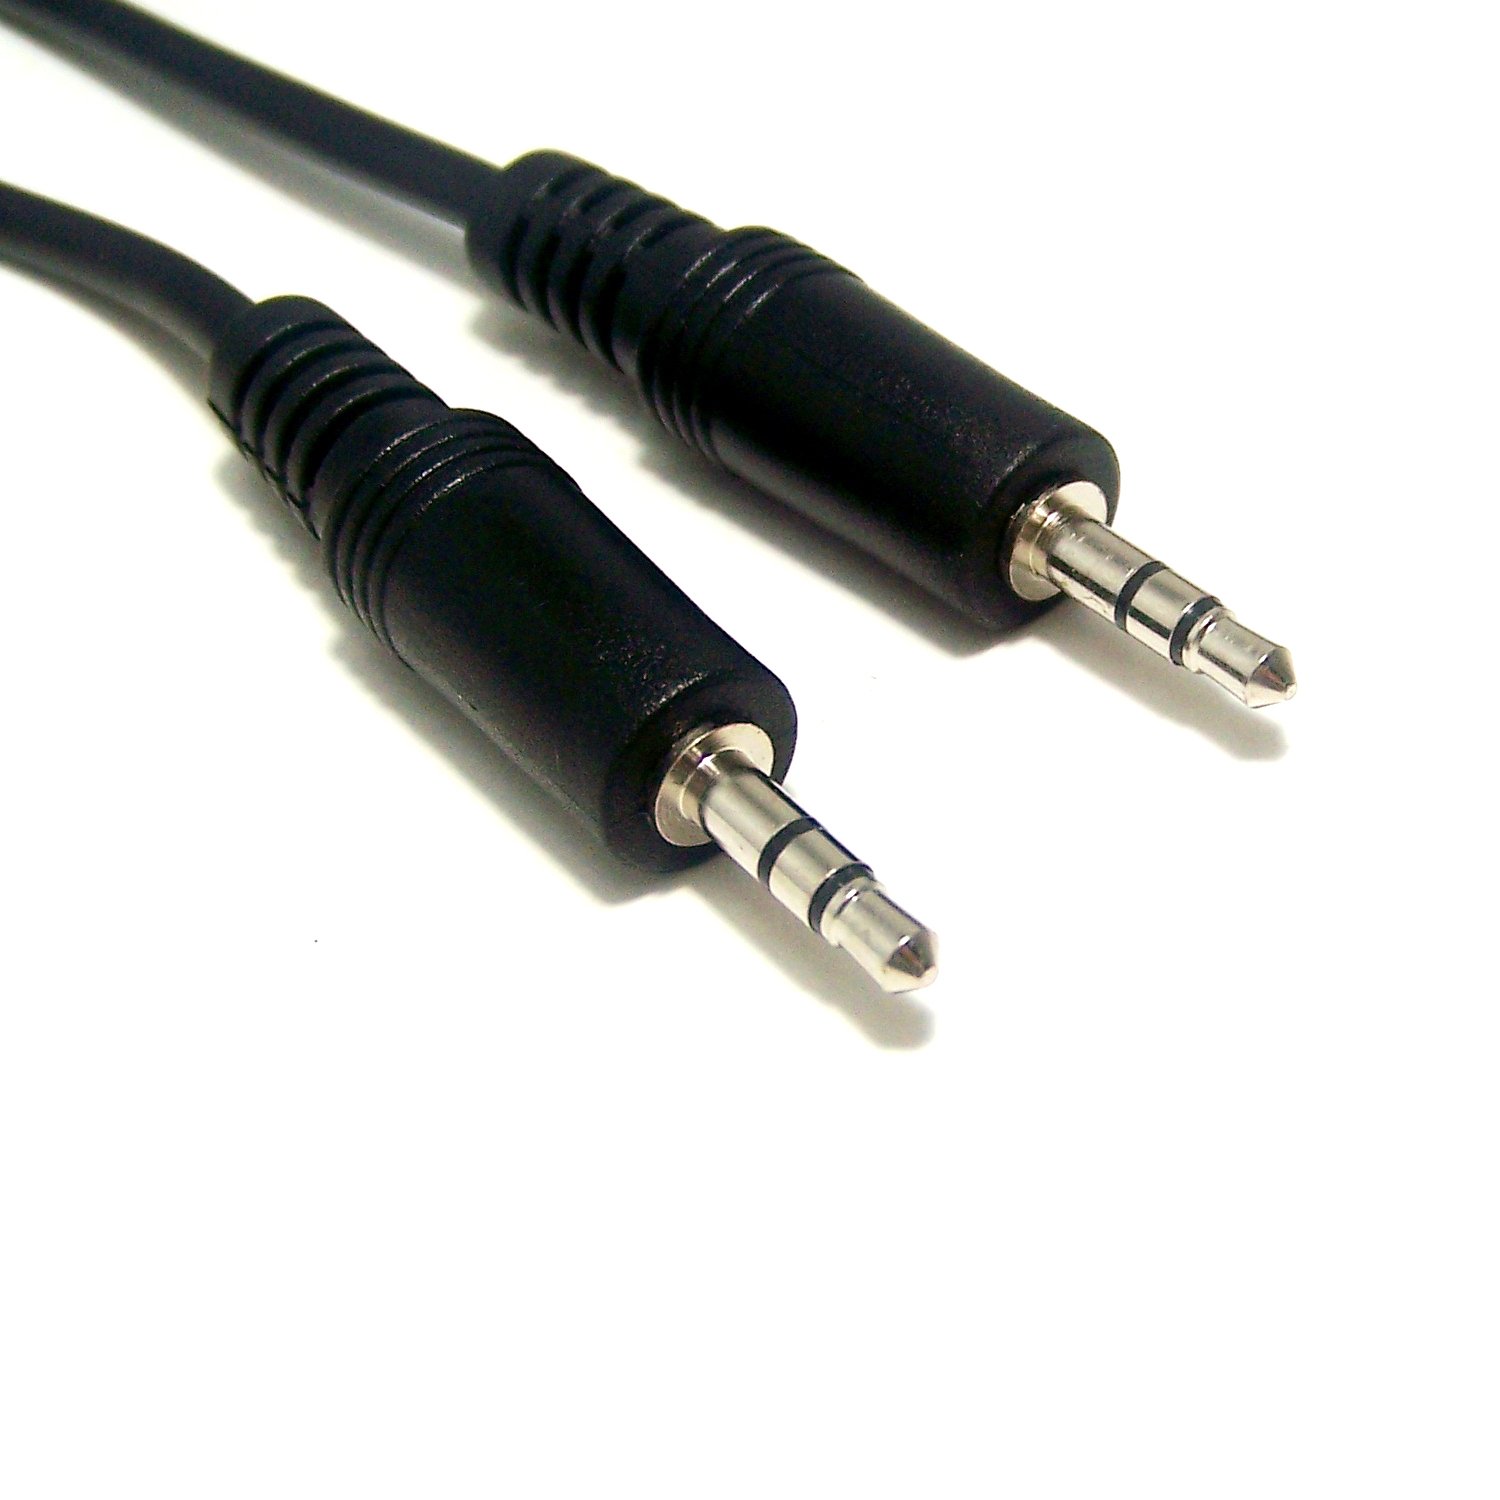 6-feet AUDIO 3.5mm STEREO M-M Cable